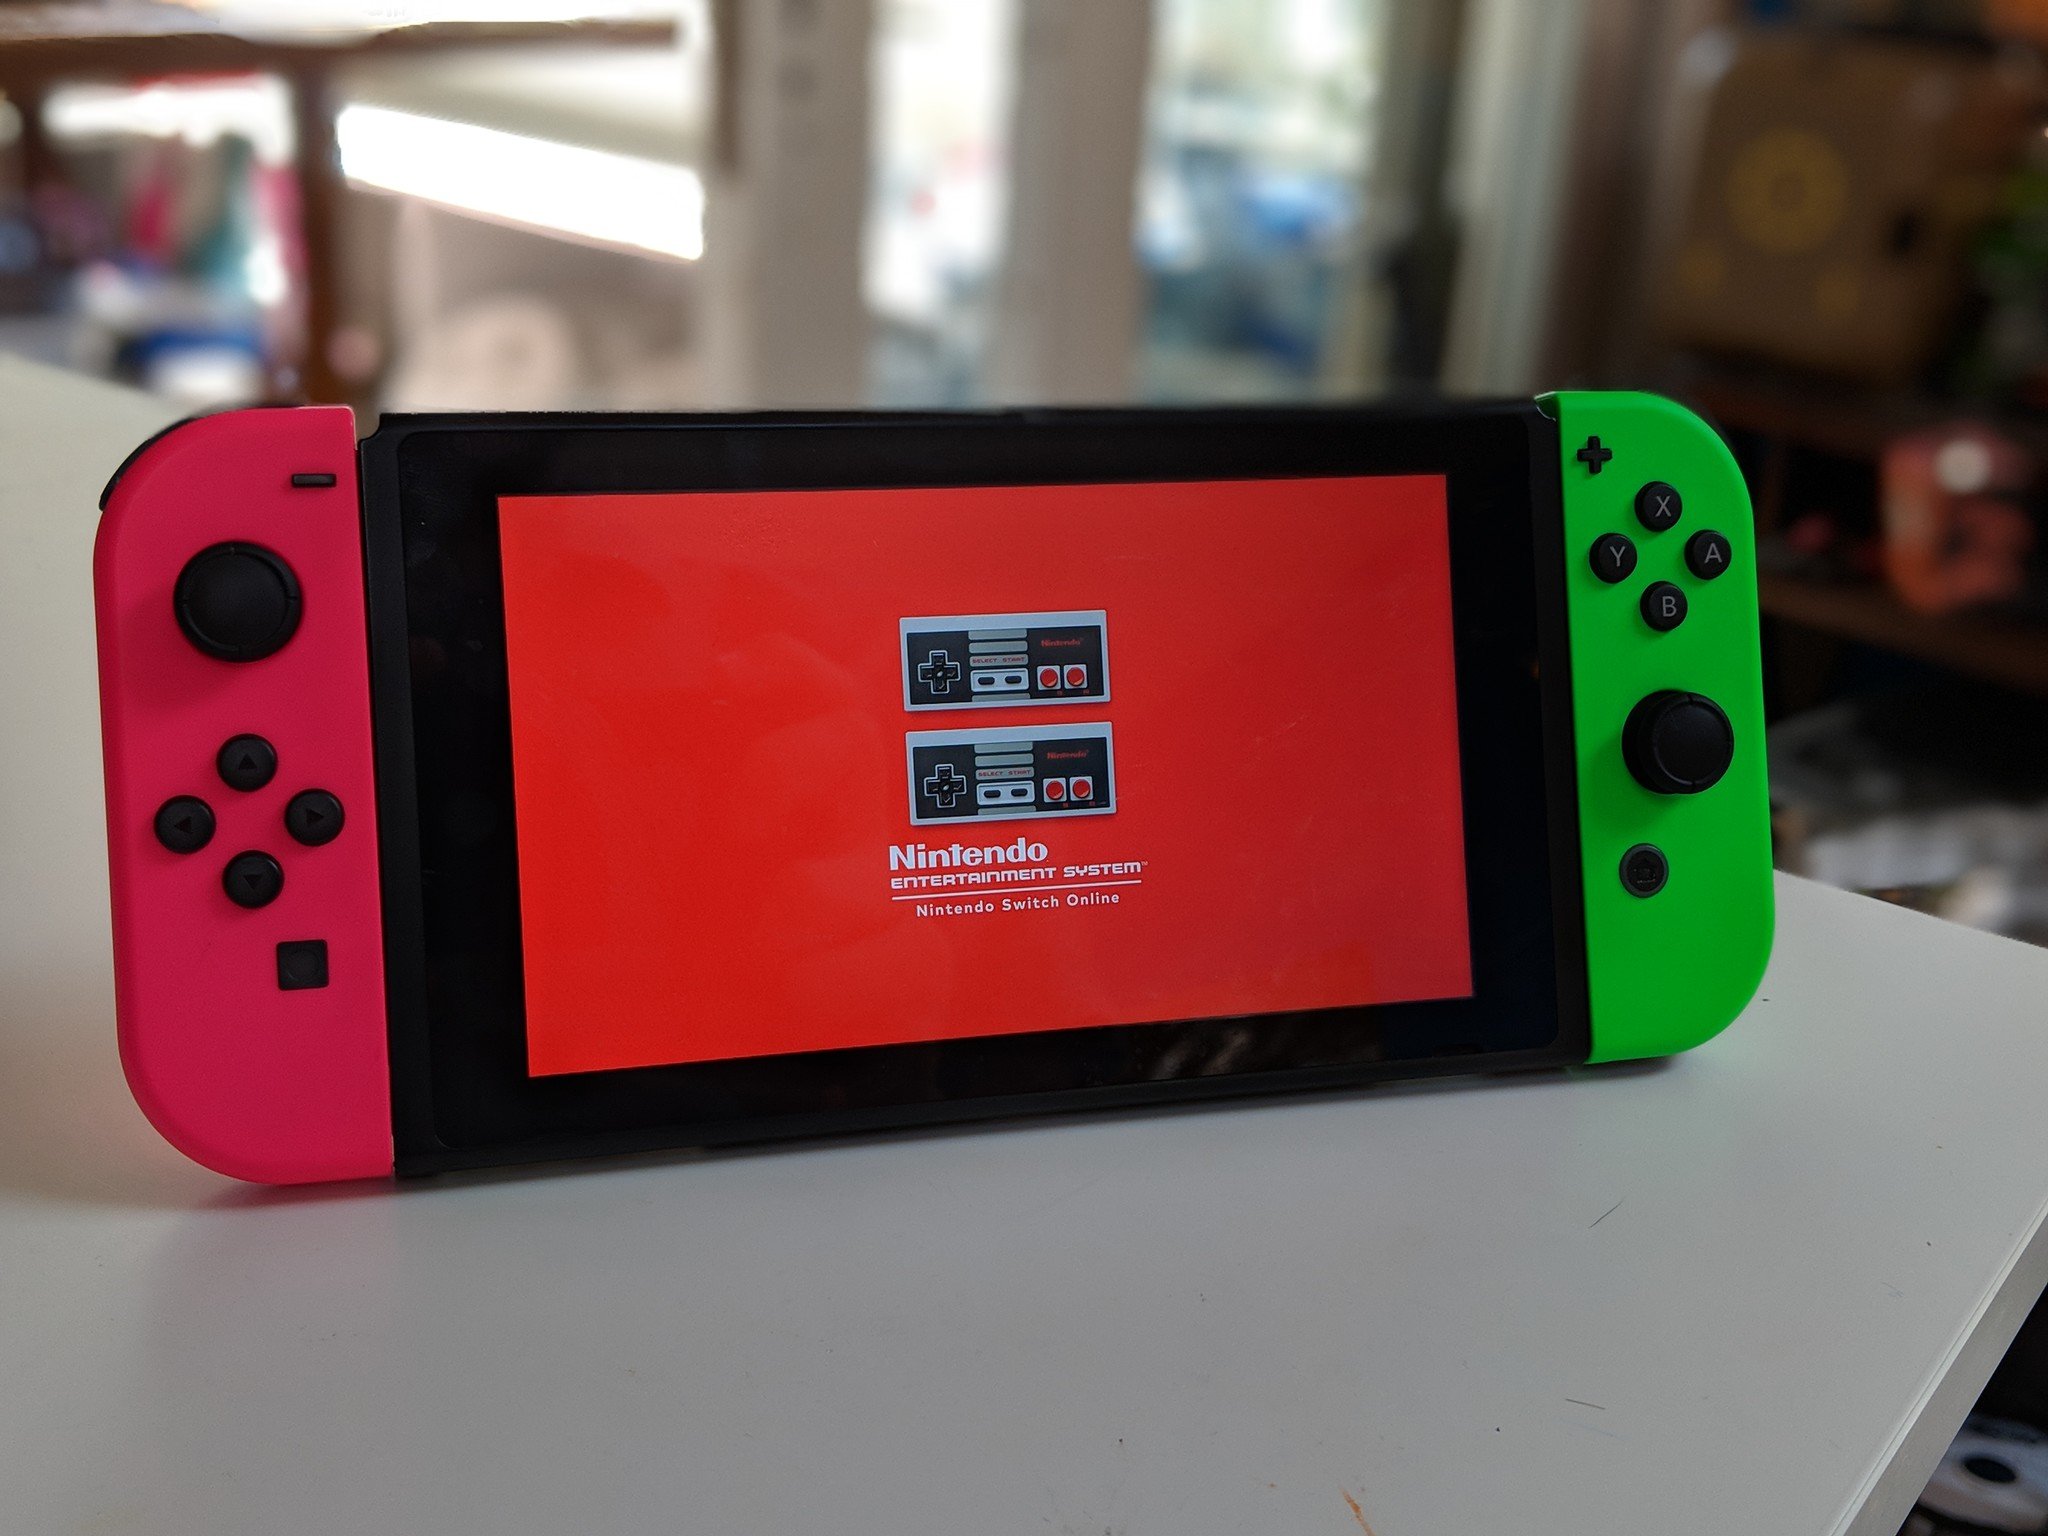 Nintendo Switch Online Family Group button